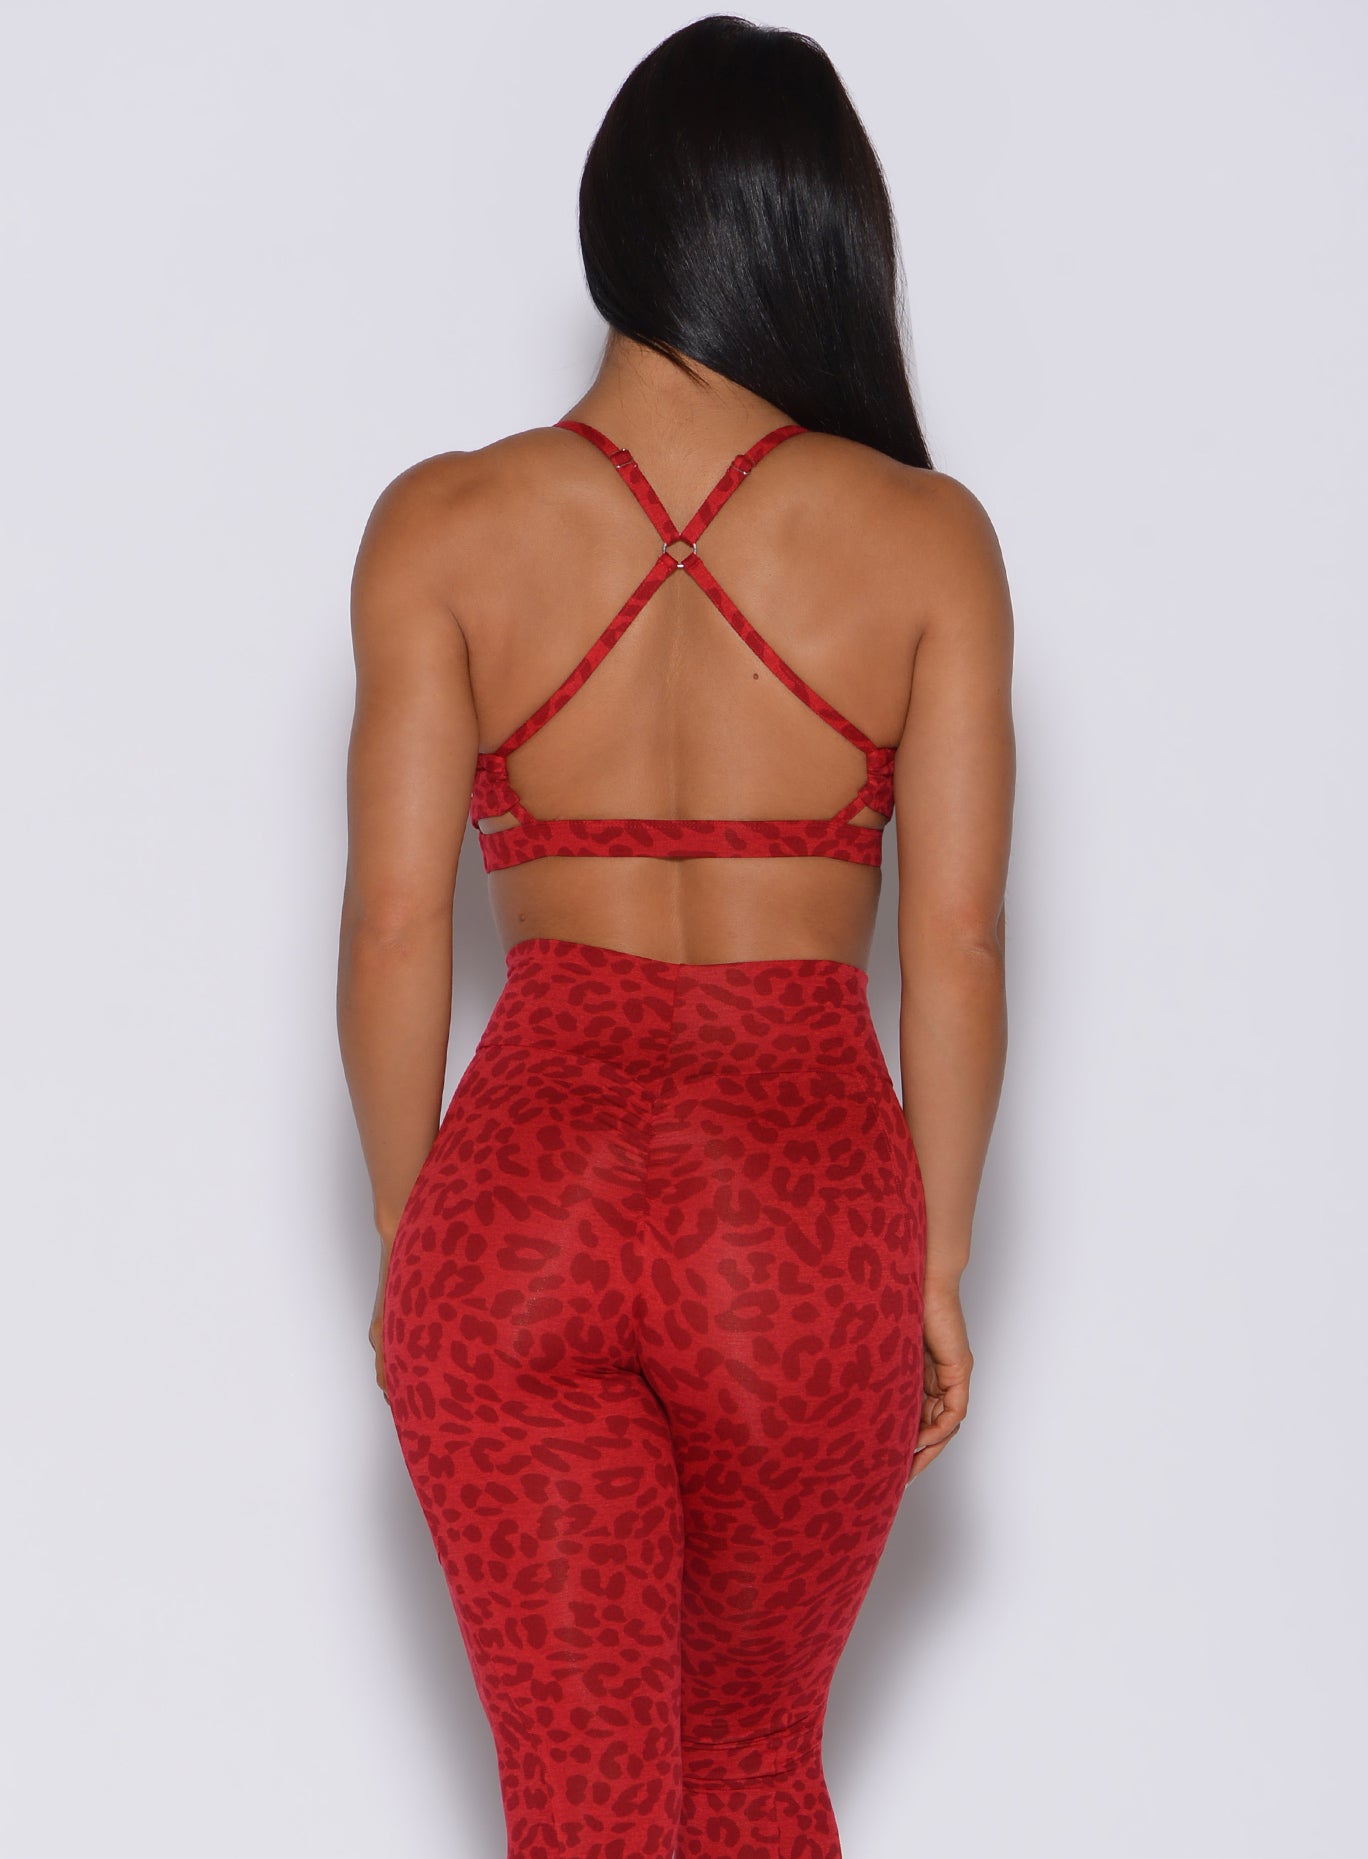 Back profile view of a model in our pumped sports bra in red cheetah color and matching leggings